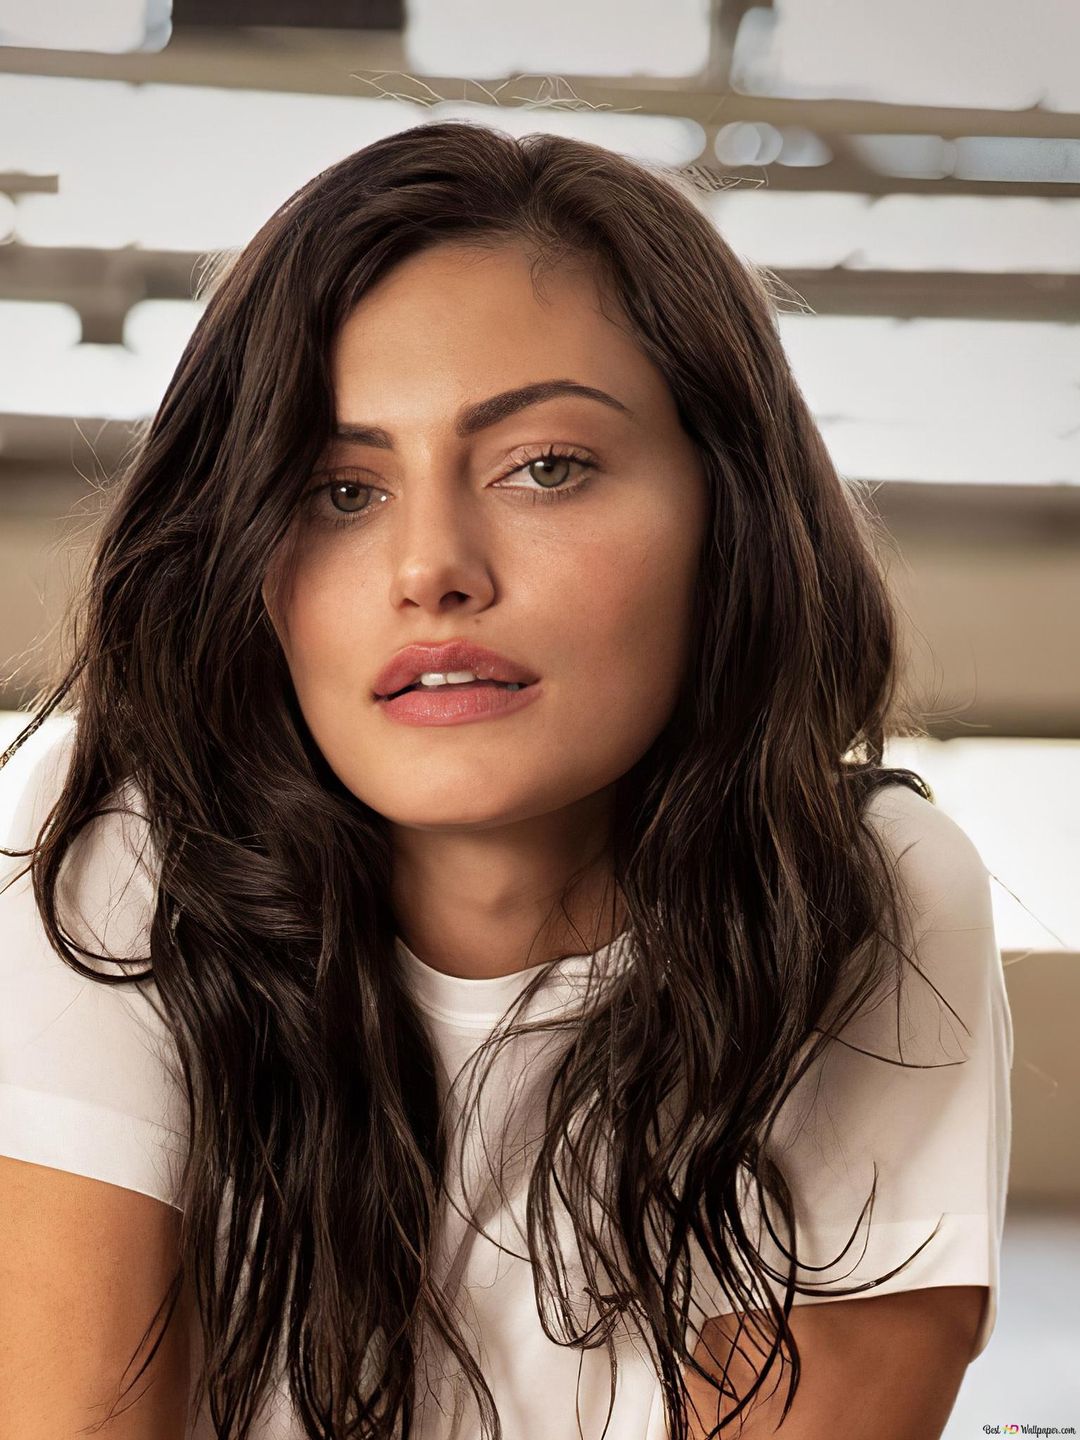 Phoebe Tonkin who are her parents